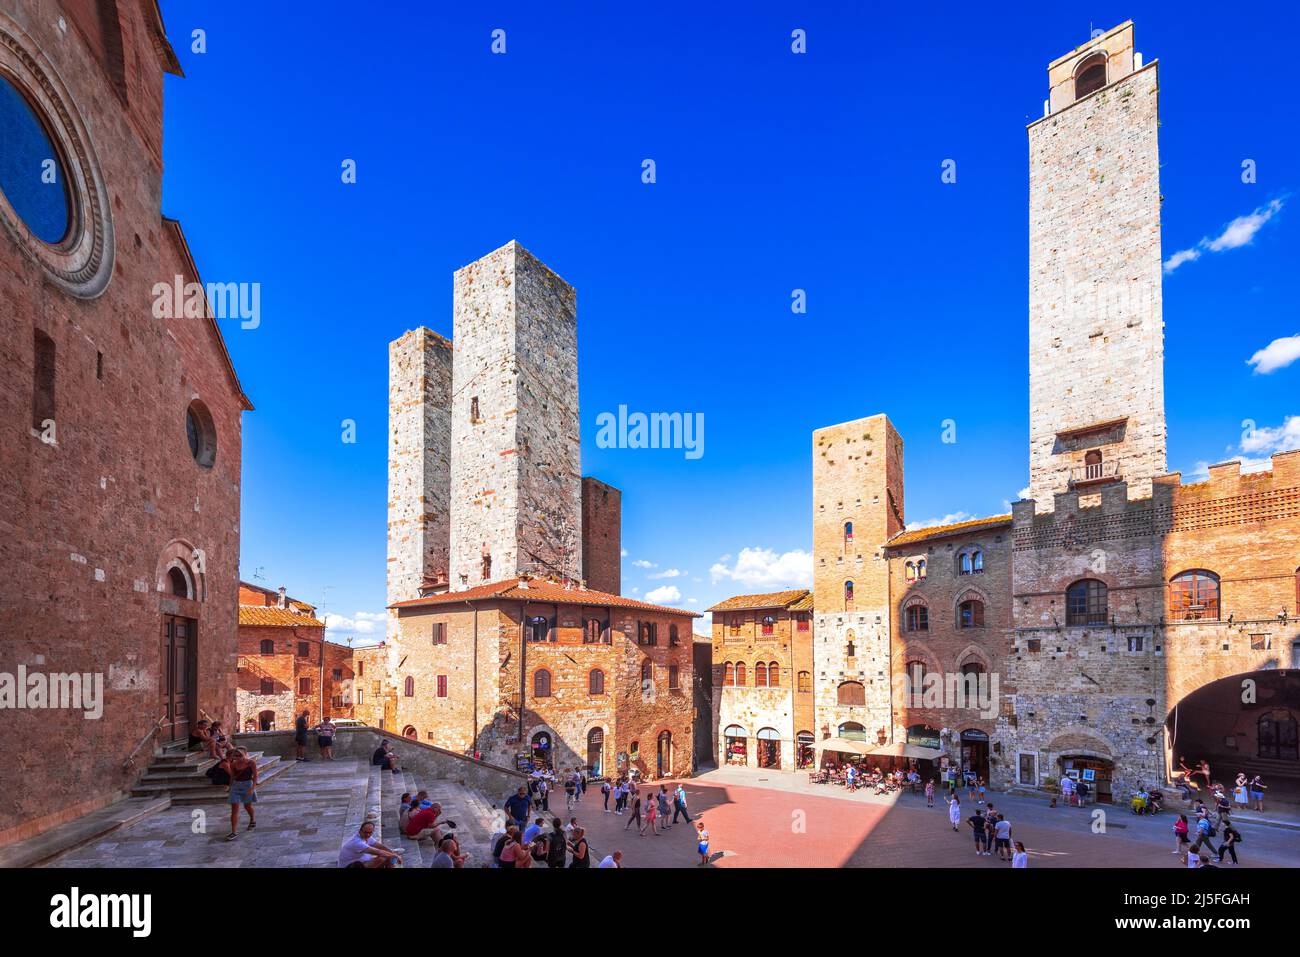 San Gimignano, Italy - September 2021. Tourists in Piazza del Duomo, San Gimignano (Italy) the famous small walled medieval hill town in the province Stock Photo